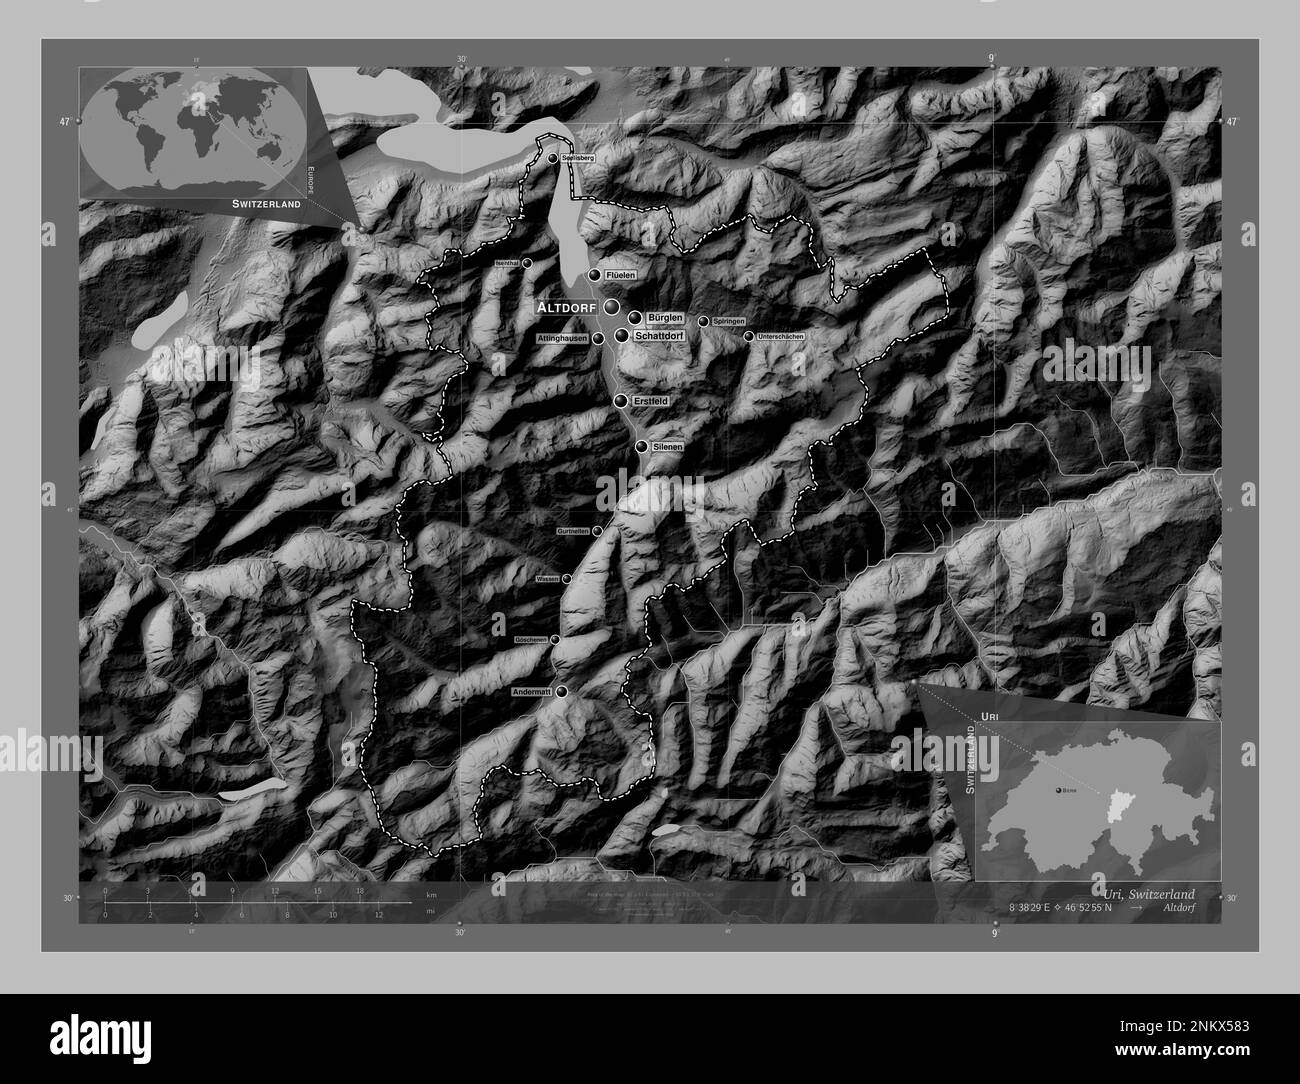 Uri, canton of Switzerland. Grayscale elevation map with lakes and rivers. Locations and names of major cities of the region. Corner auxiliary locatio Stock Photo